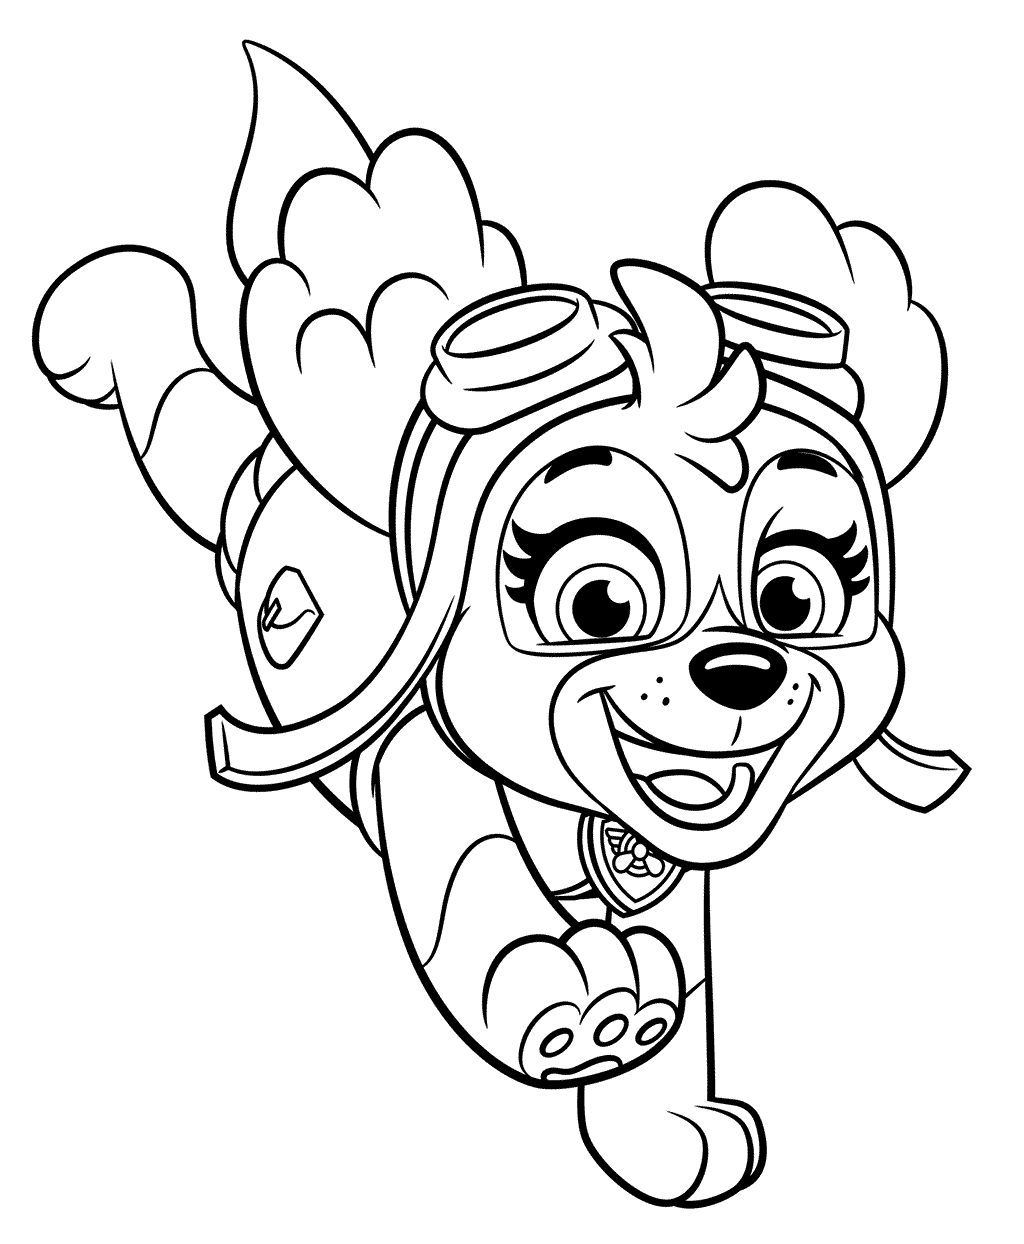 Skye From PAW Patrol Coloring Page